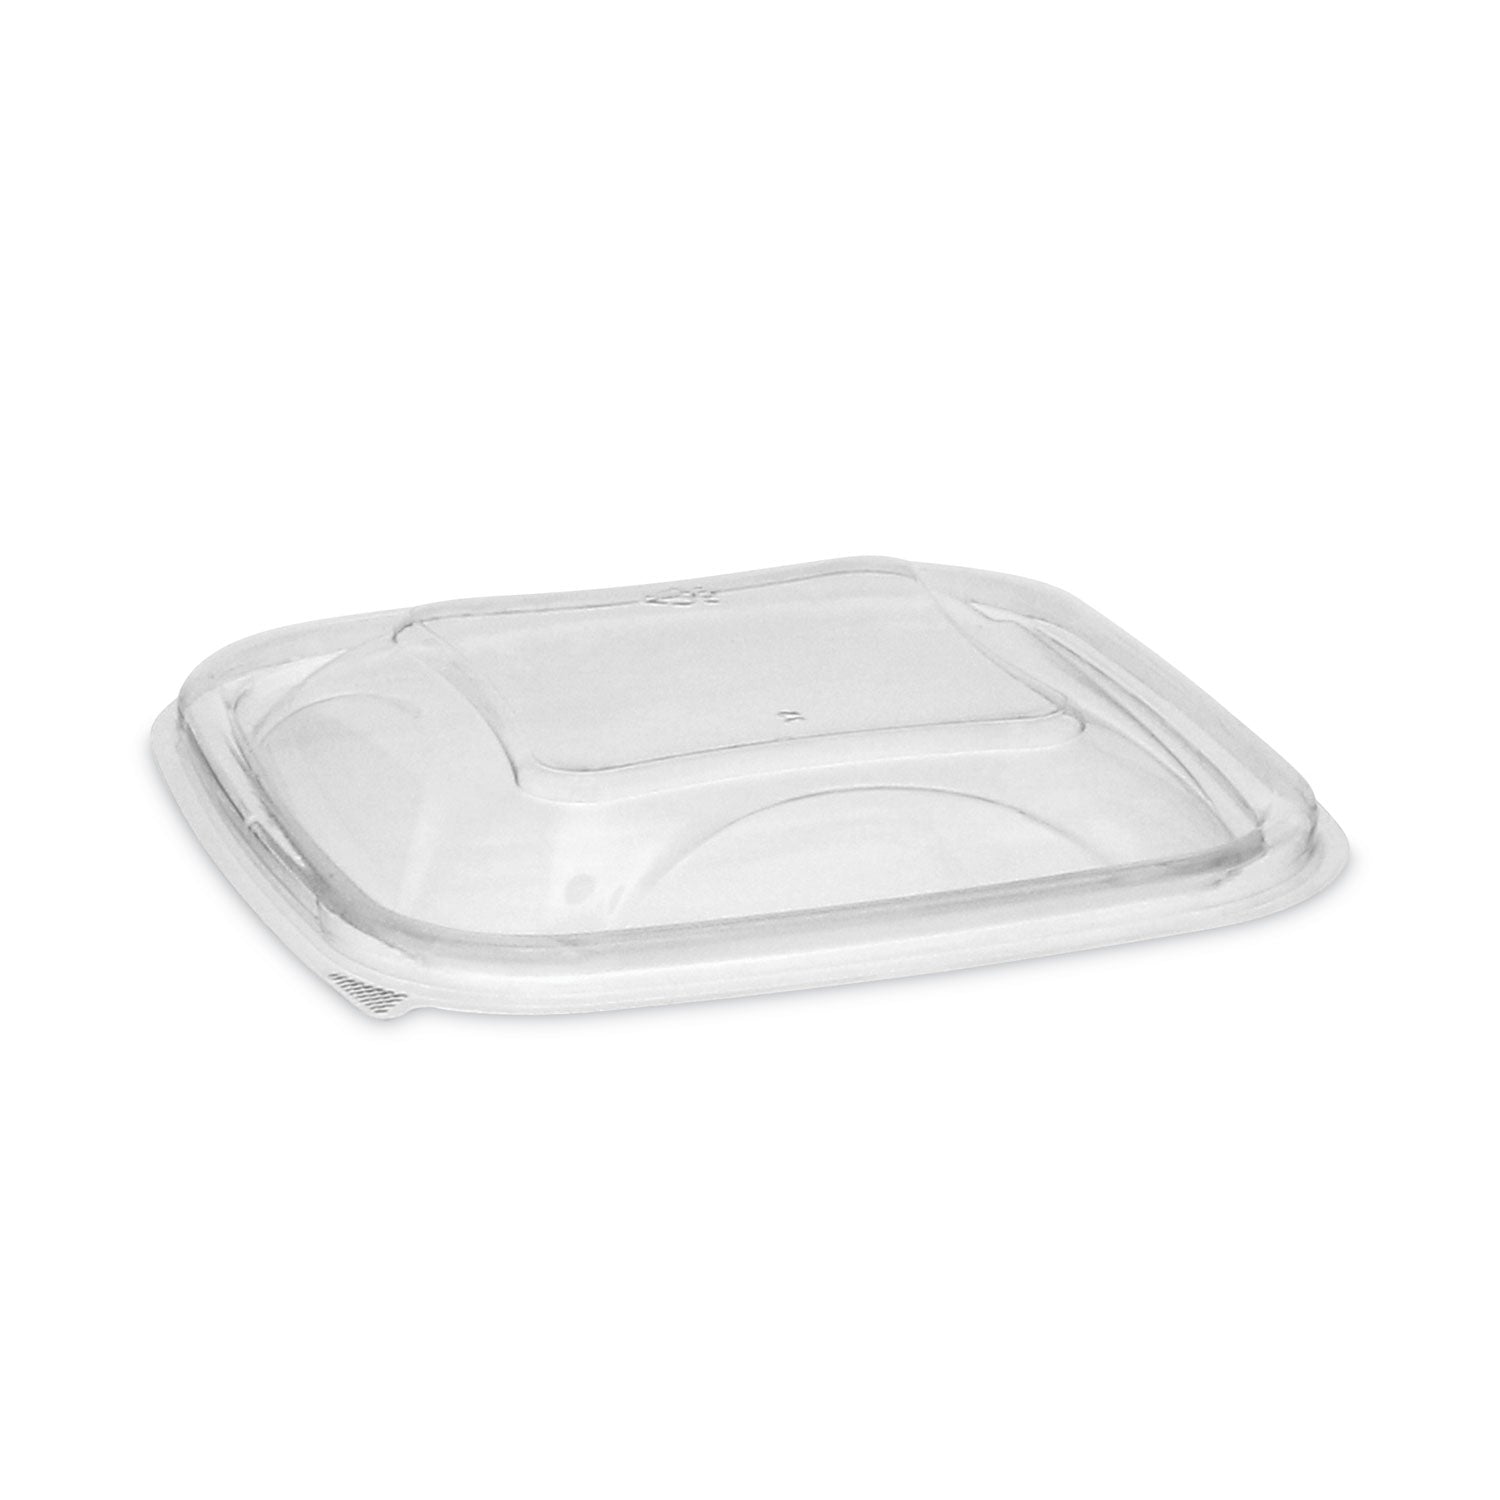 earthchoice-recycled-pet-container-lid-for-8-12-16-oz-container-bases-55-x-55-x-038-clear-plastic-504-carton_pctysacld05 - 1